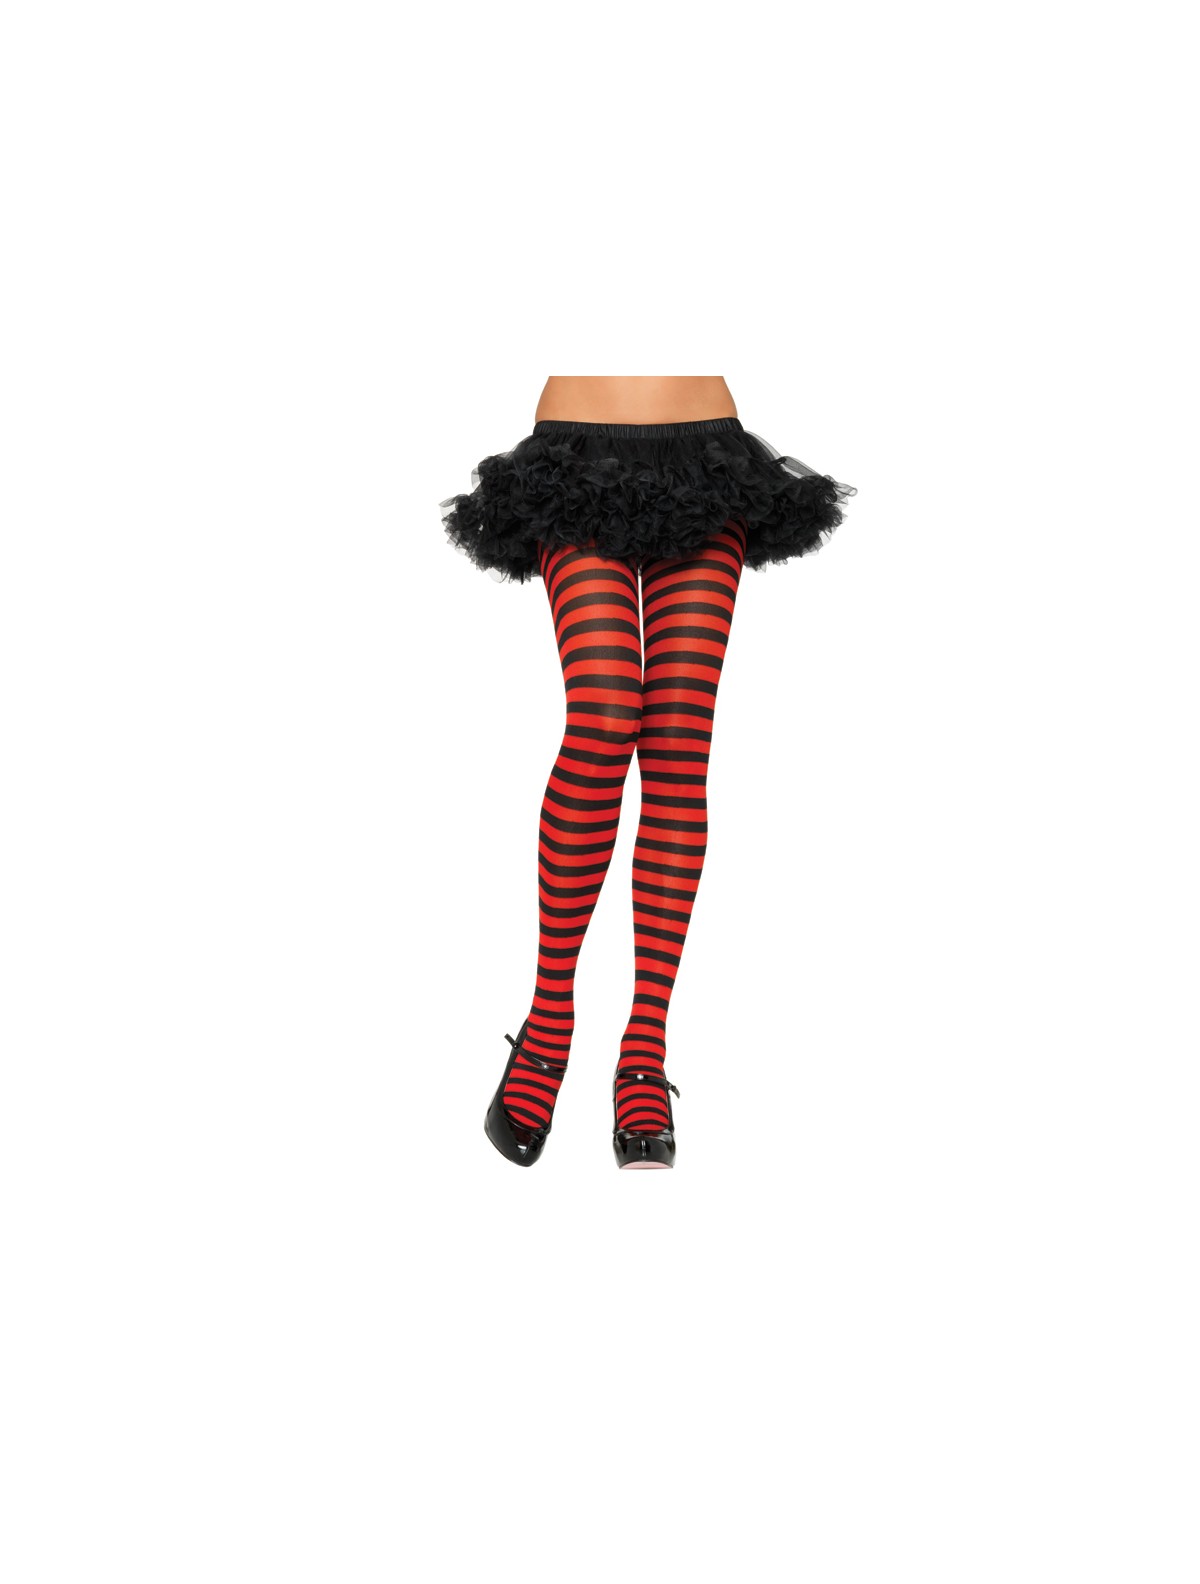 Leg Avenue Stripe Tights. Many different trendy colours to choose